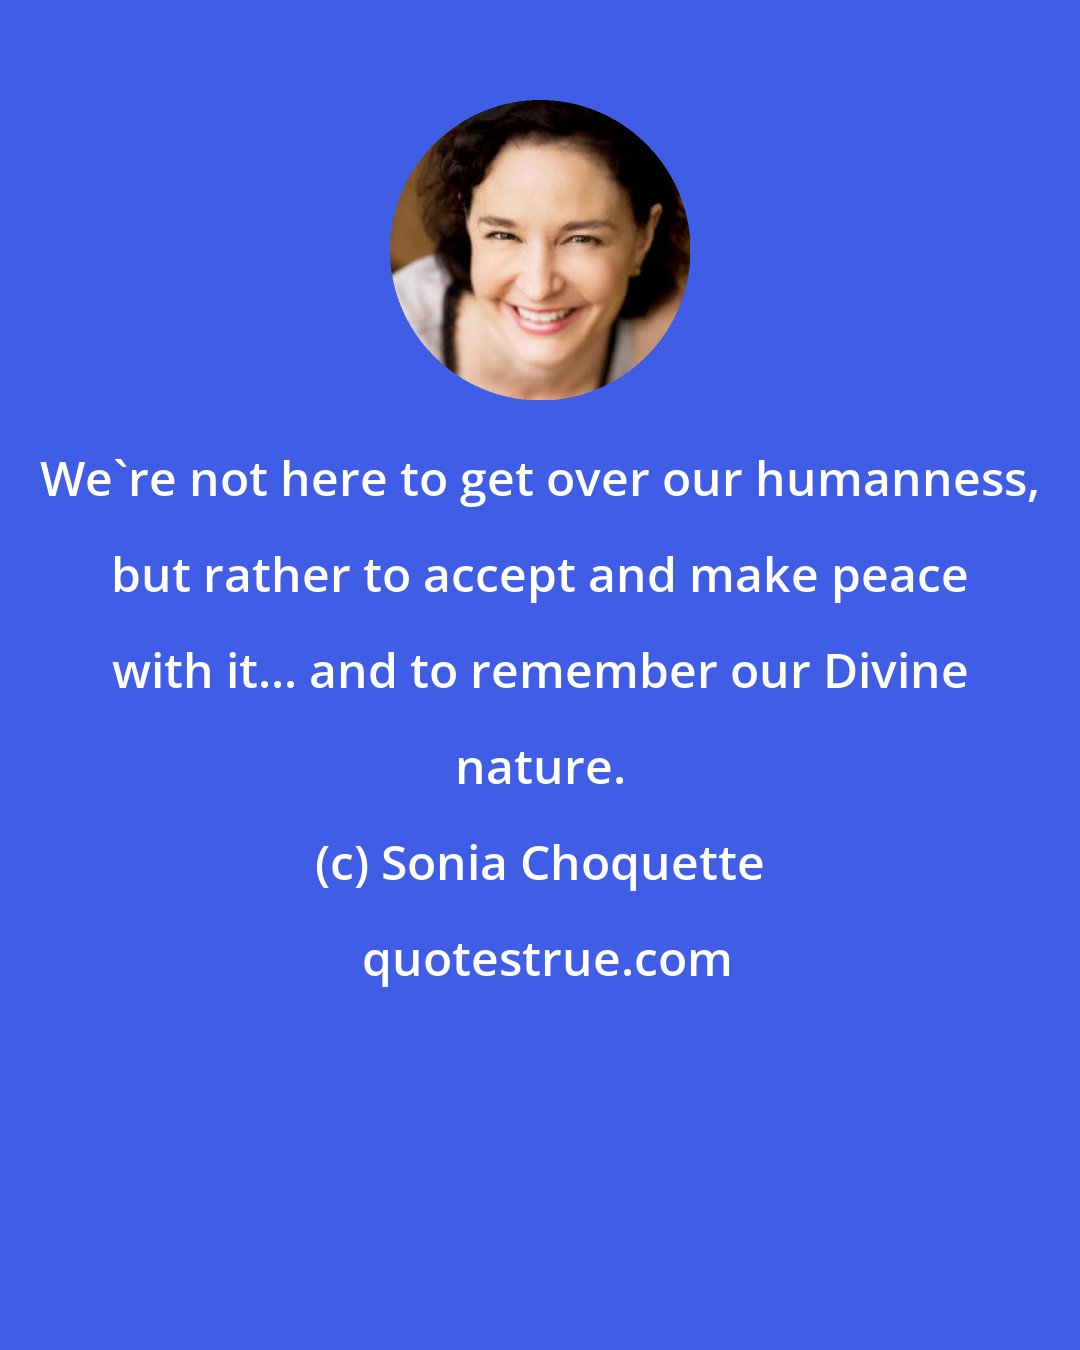 Sonia Choquette: We're not here to get over our humanness, but rather to accept and make peace with it... and to remember our Divine nature.